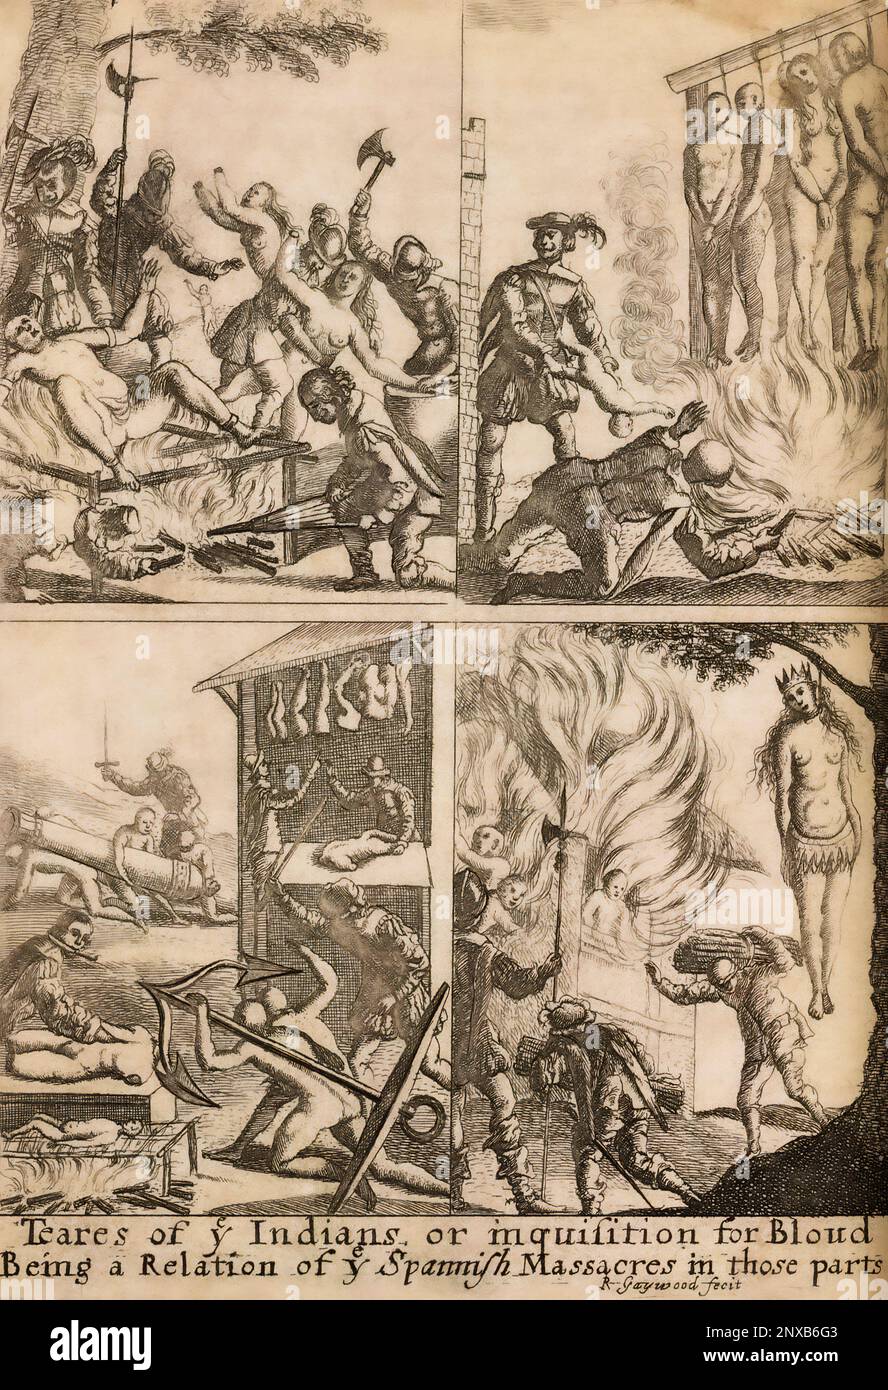 A 17th century illustration by Richard Gaywood, purporting to show mistreatment and torture of American Indians by their Spanish masters.  The title beneath reads:  Teares of ye Indians or inquisition for bloud: being a relation of ye Spannish massacres in those parts. Stock Photo